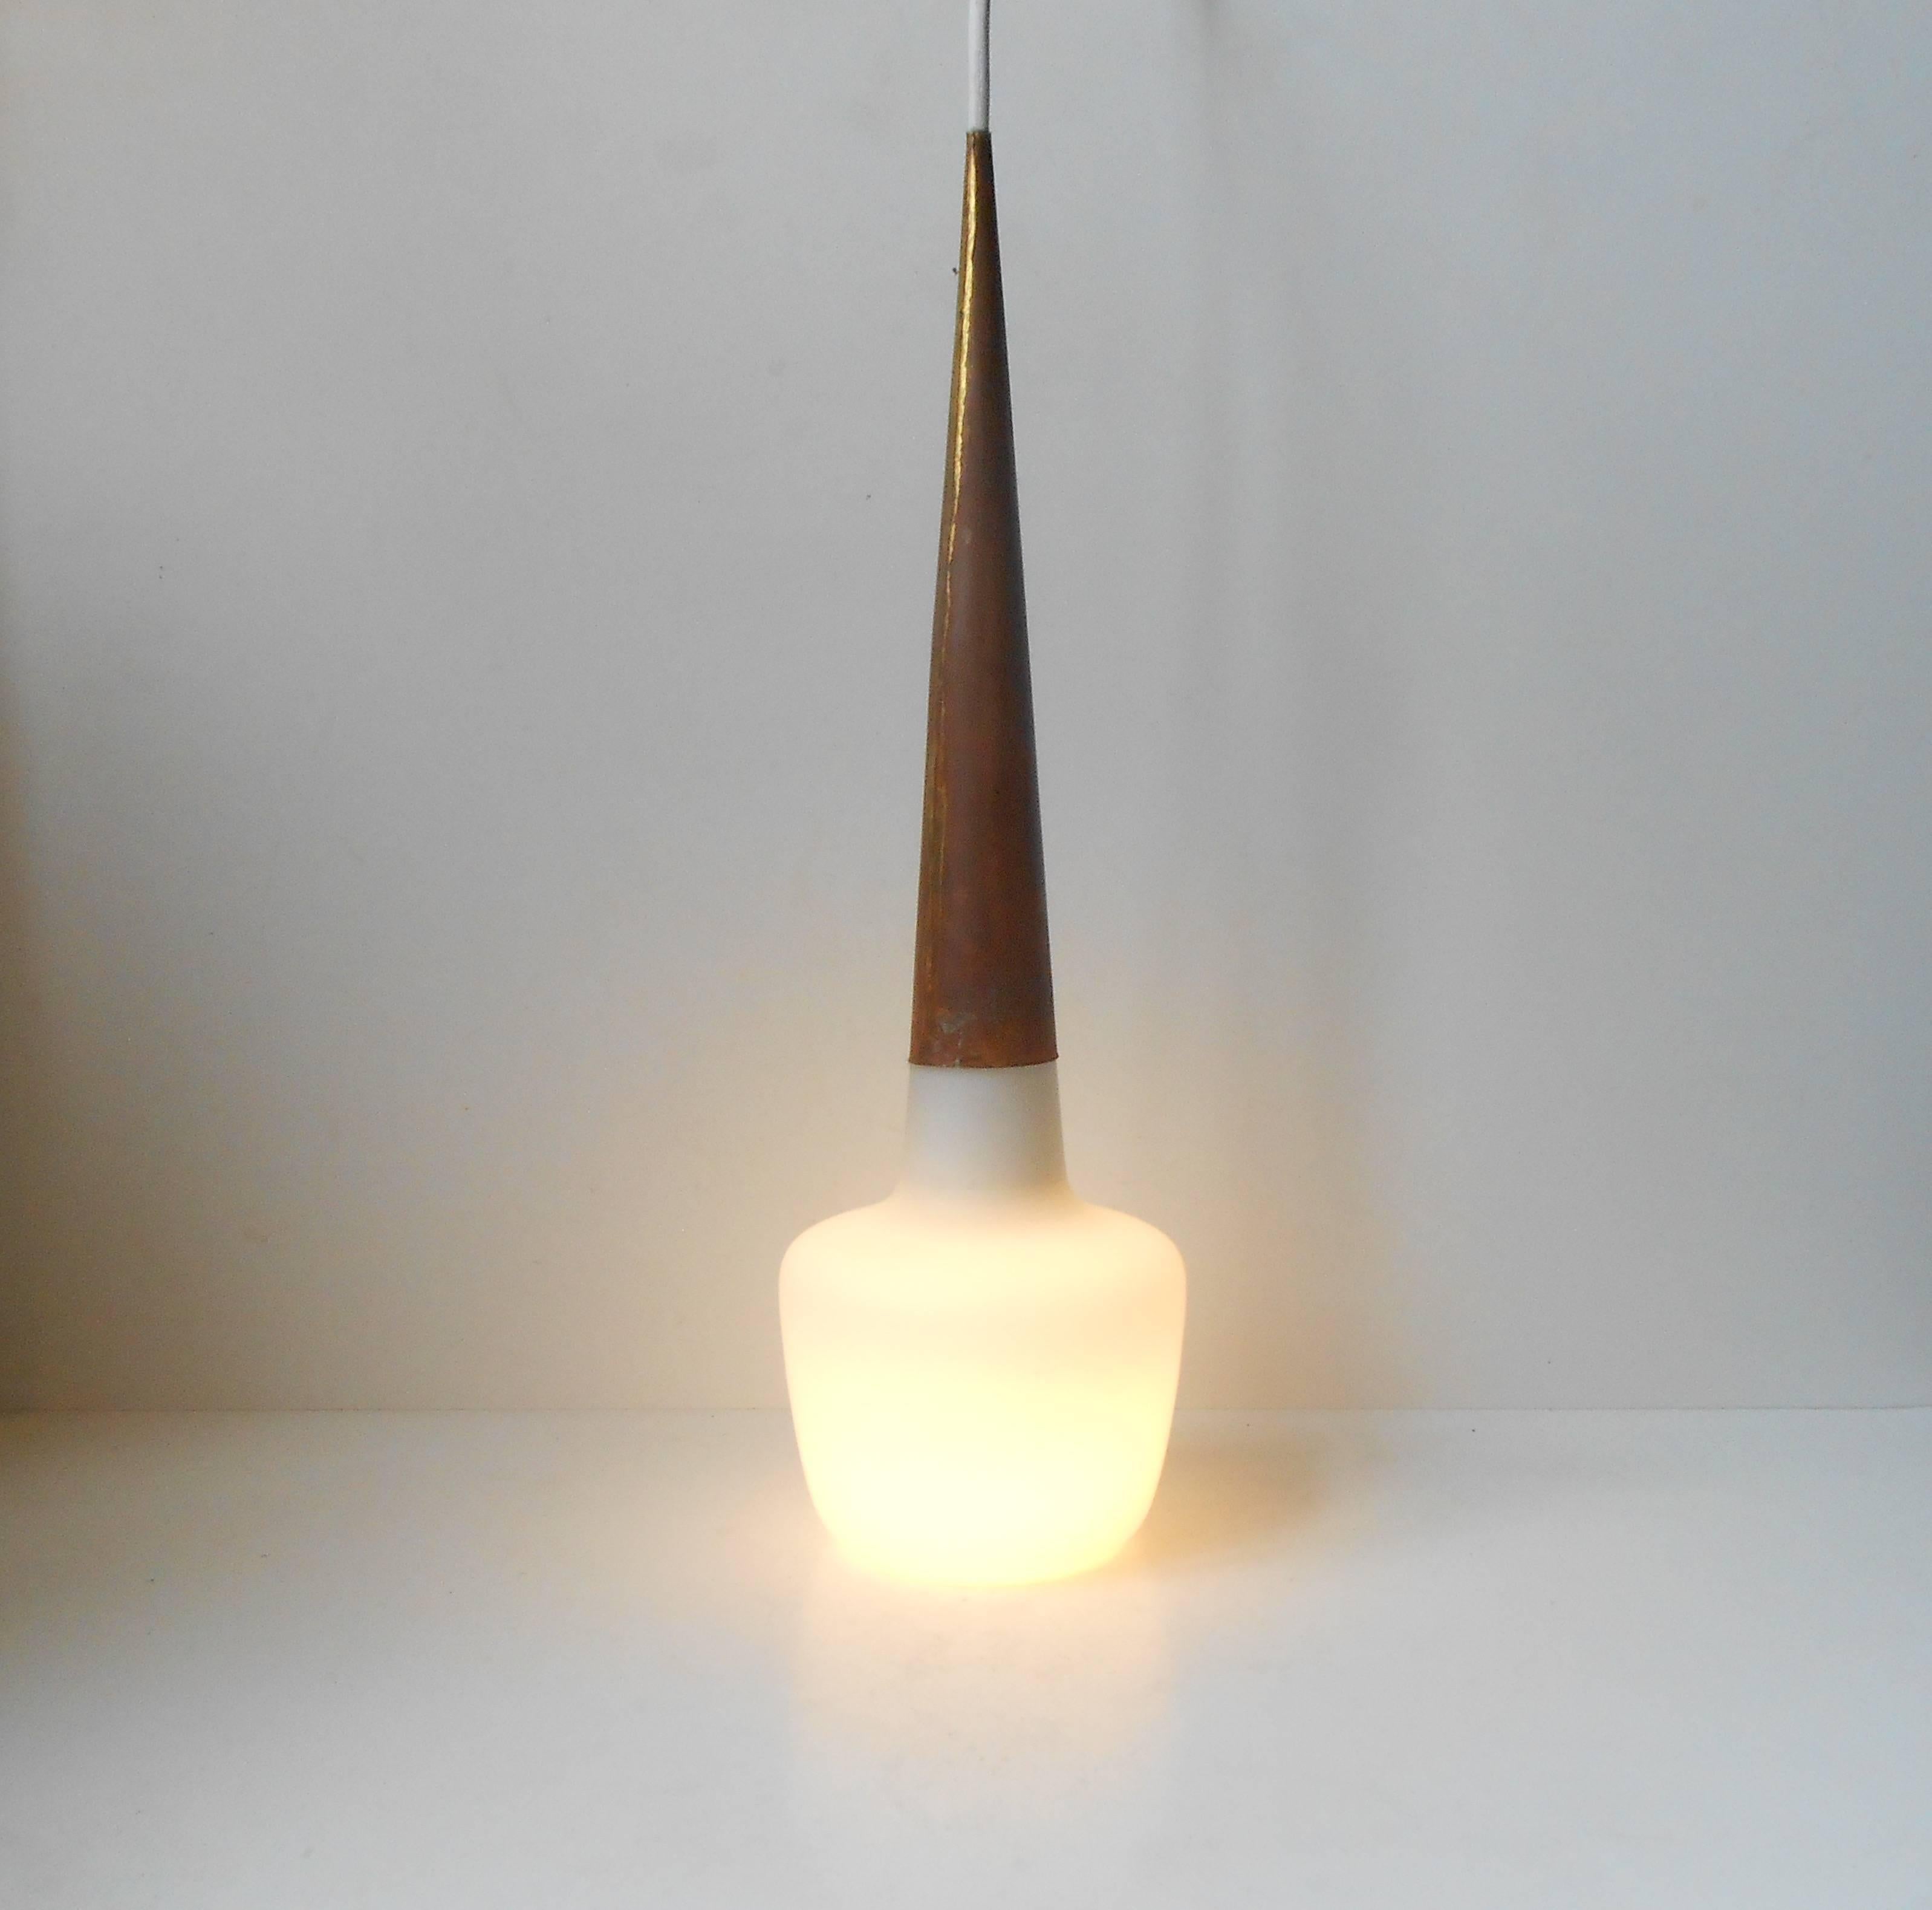 Mid-20th Century Brutalist Opal Glass and Metal Pendant Lamp by Anonymous Danish Designer, 1960s